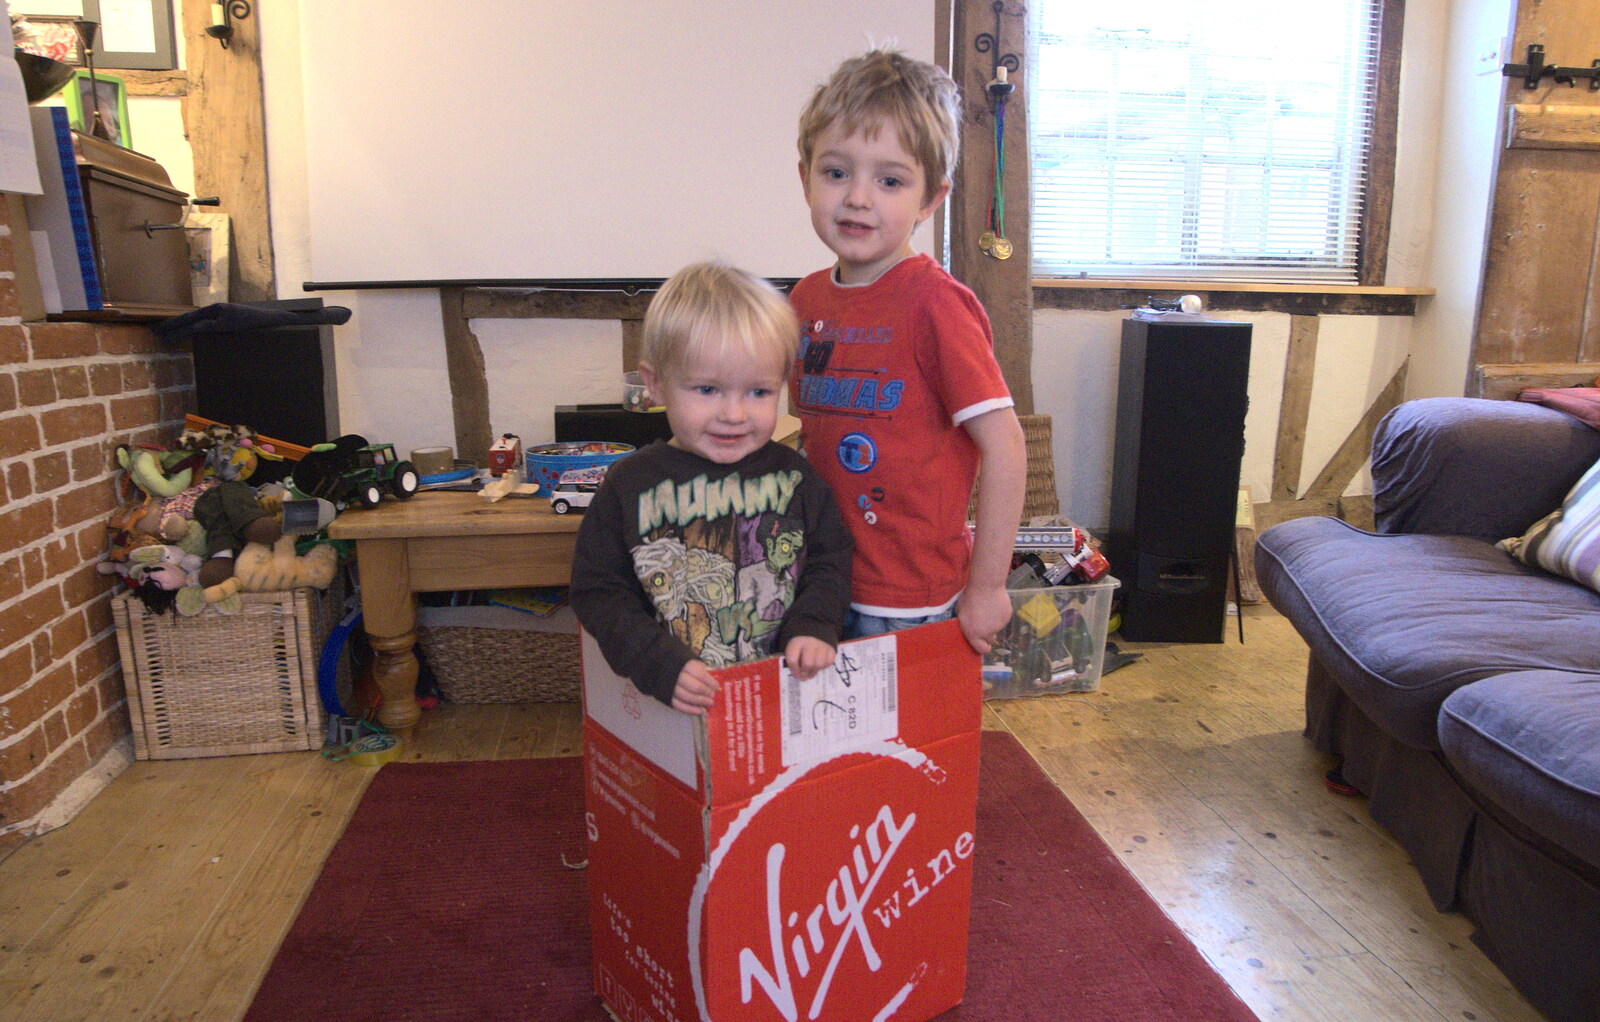 More Building and Palgrave Playground, Suffolk - 24th November 2013: The boys are in a cardboard box